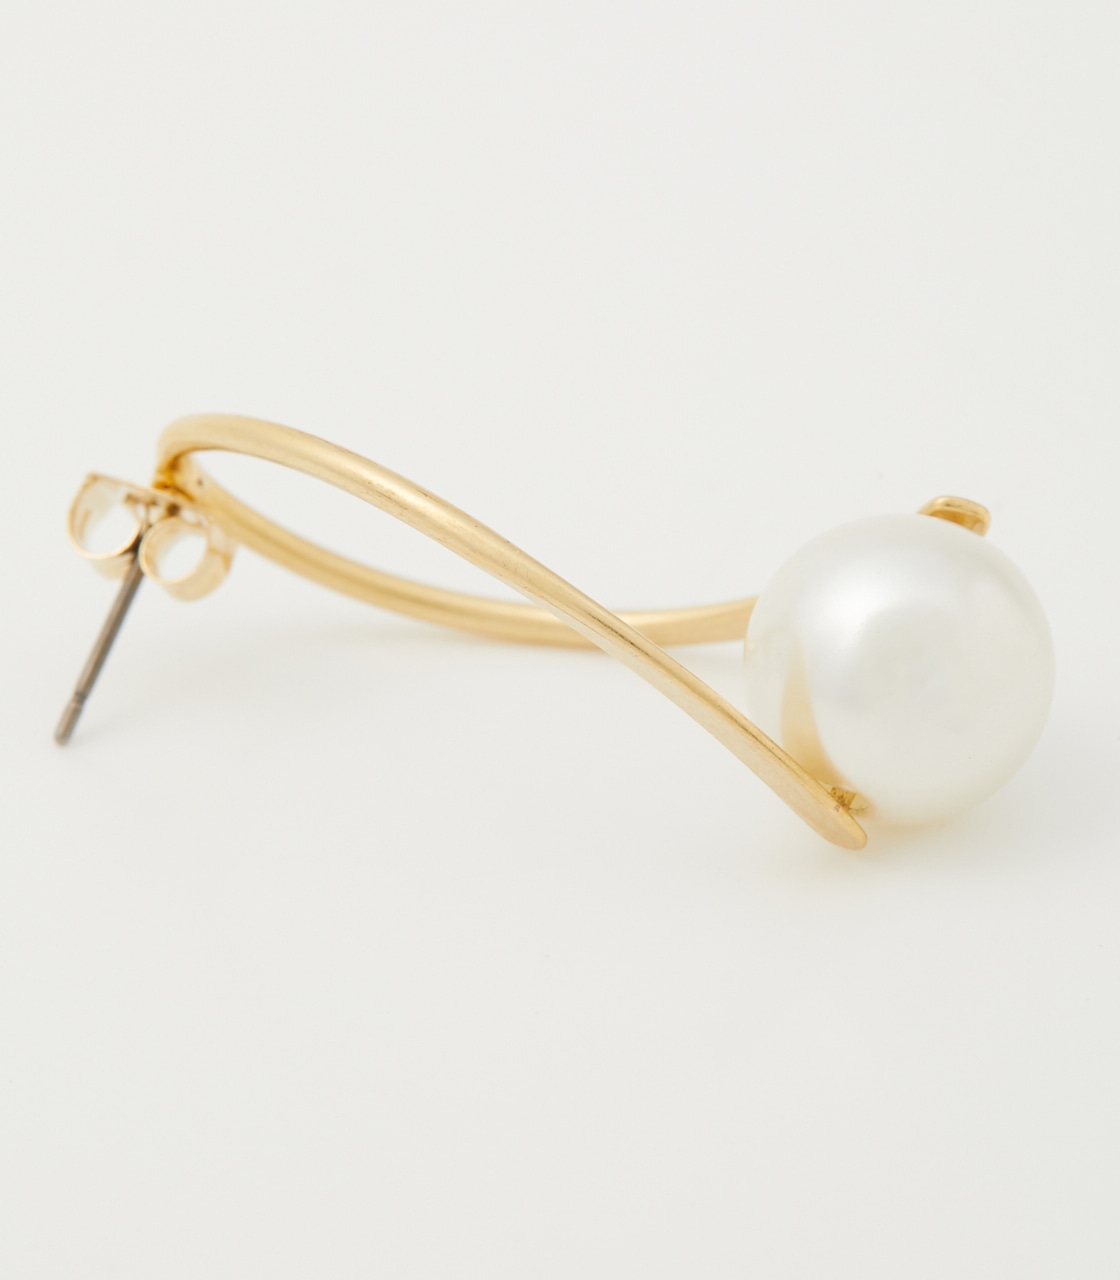 WRAPPED PEARL EARRINGS/ラップパールピアス 詳細画像 L/GLD 4